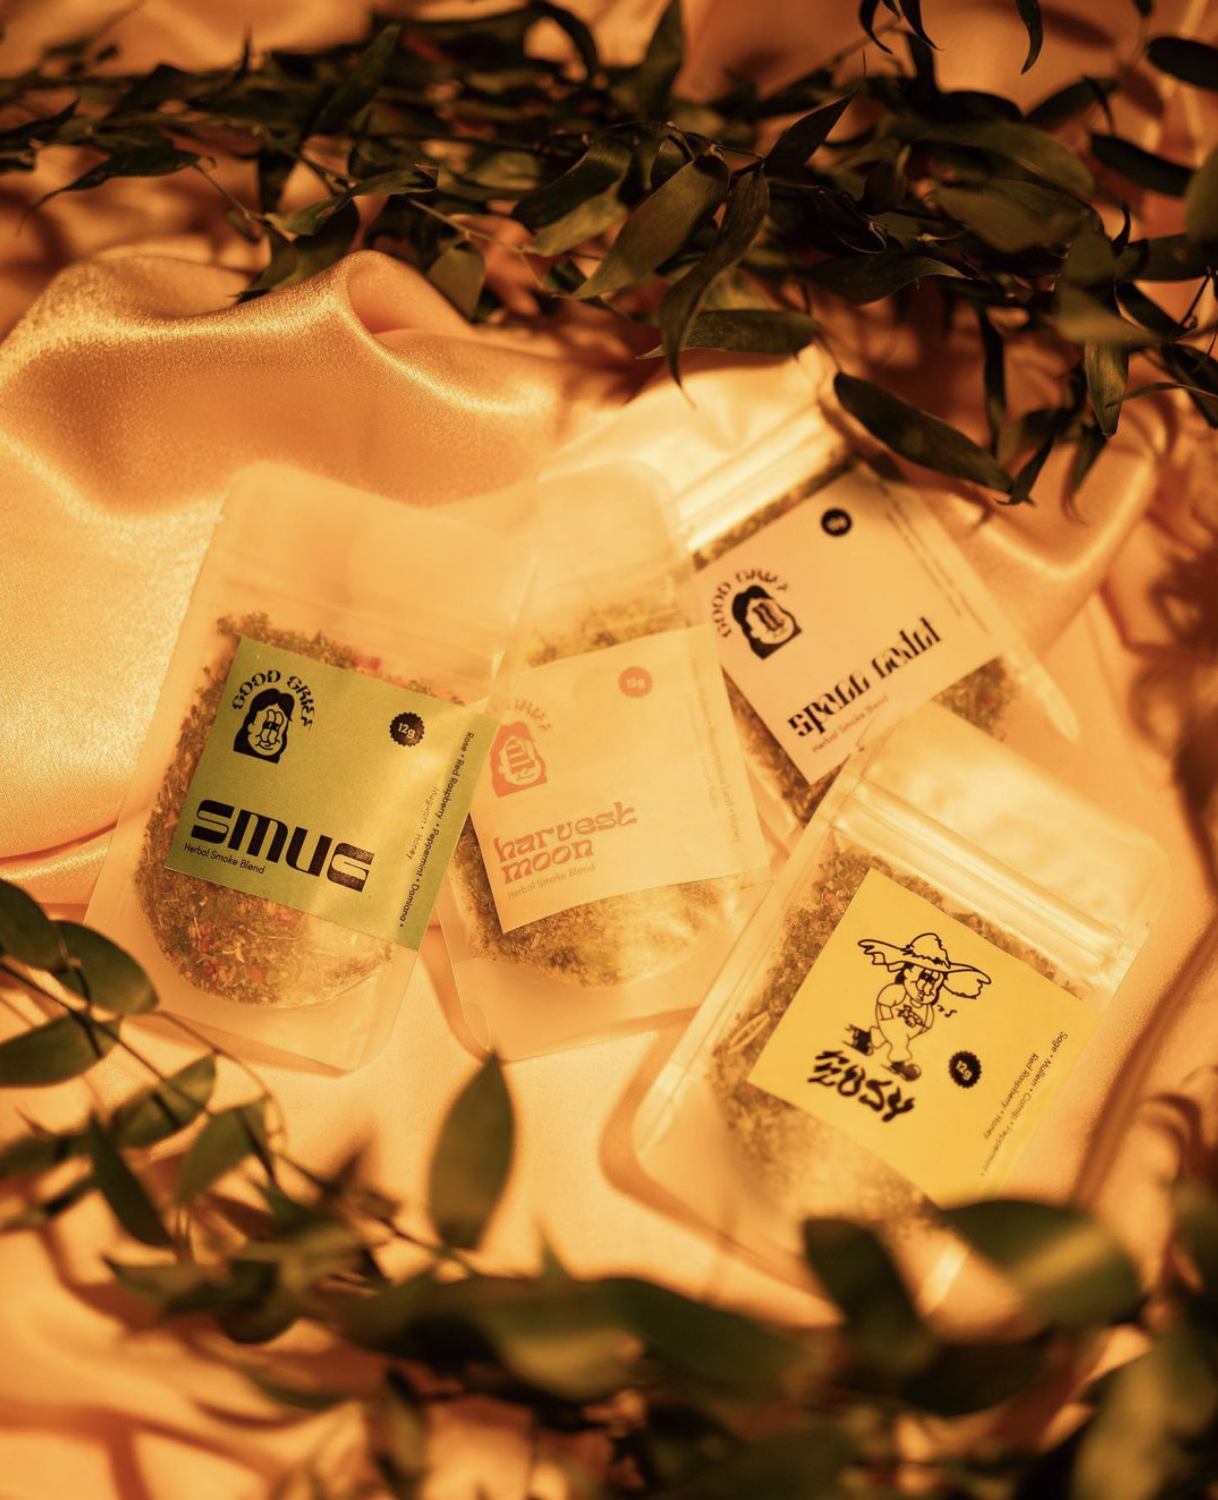 4 bags of herbal blends are posed on a silk cloth with leaves around in warm lighting.